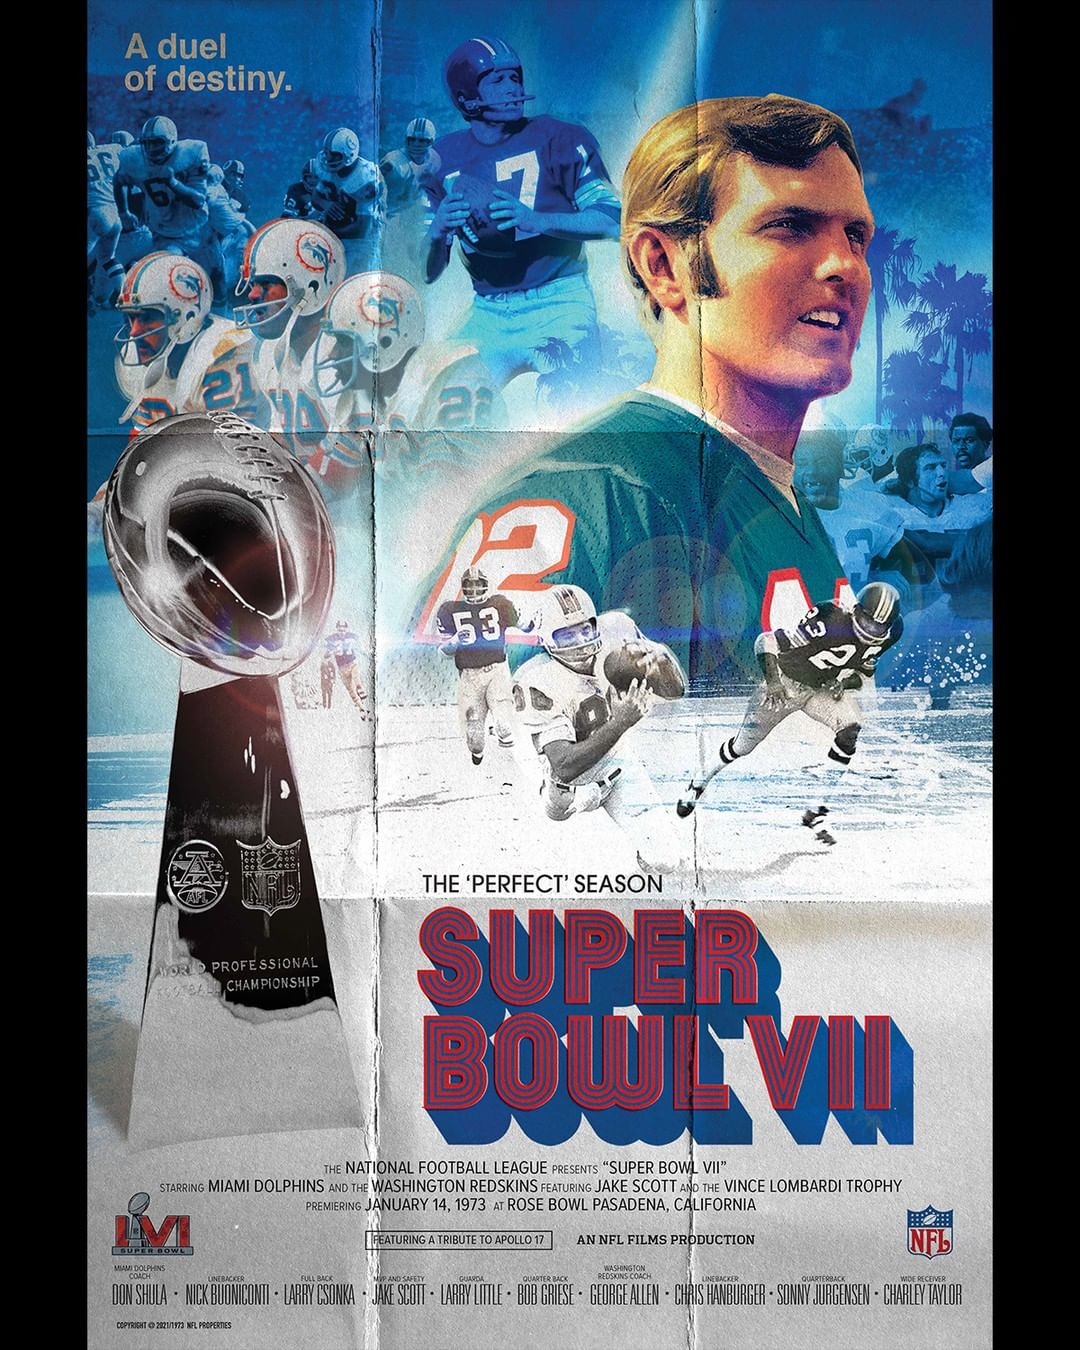 Super Bowl VII. January 14, 1973. The second Super Bowl to take place in Los Ang...